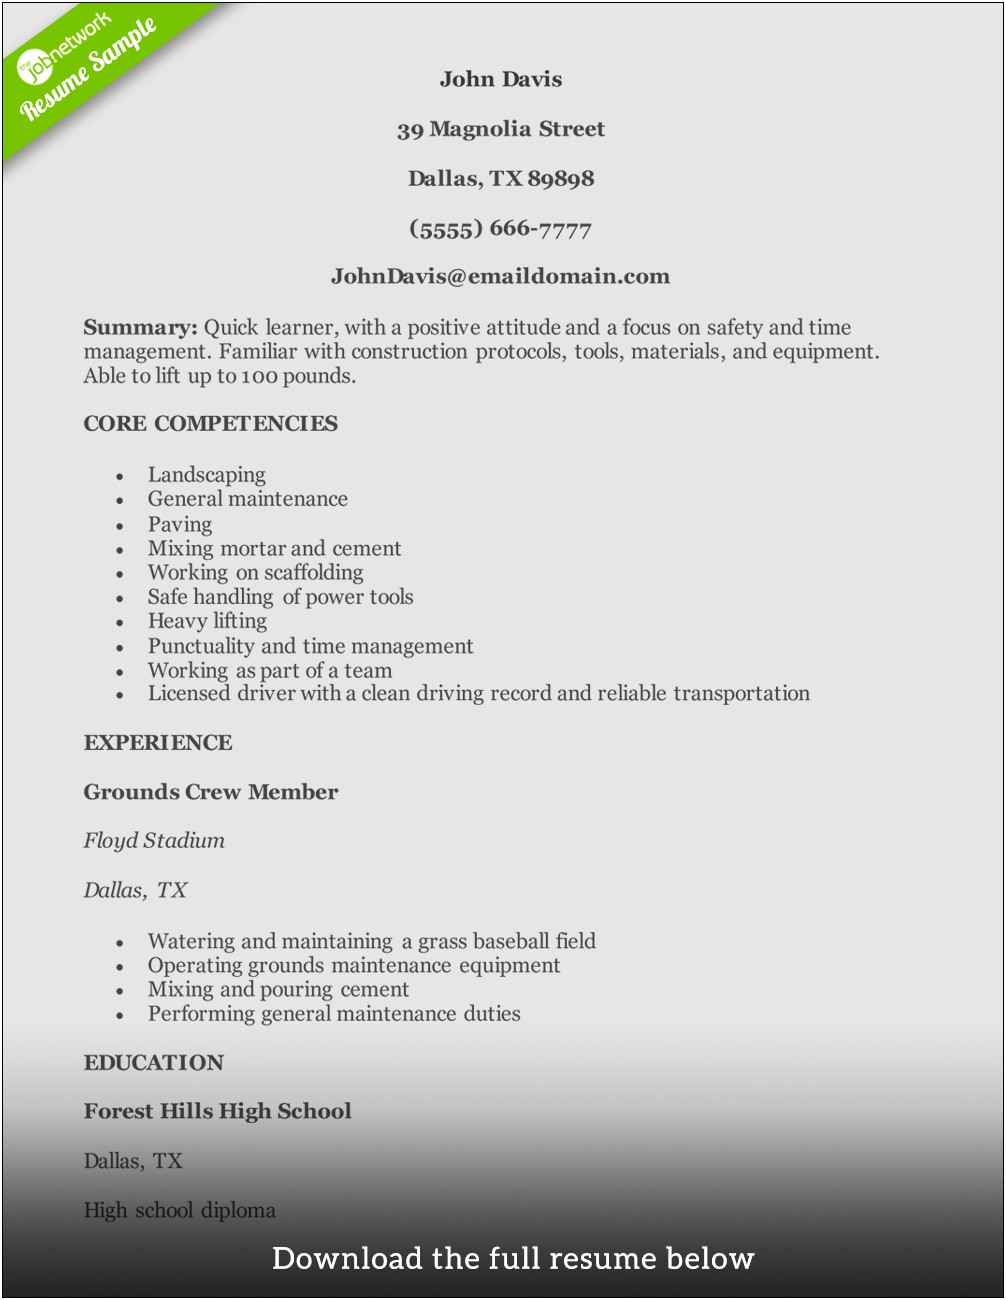 Resume Summary For Cconstruction Materkiqls Tester